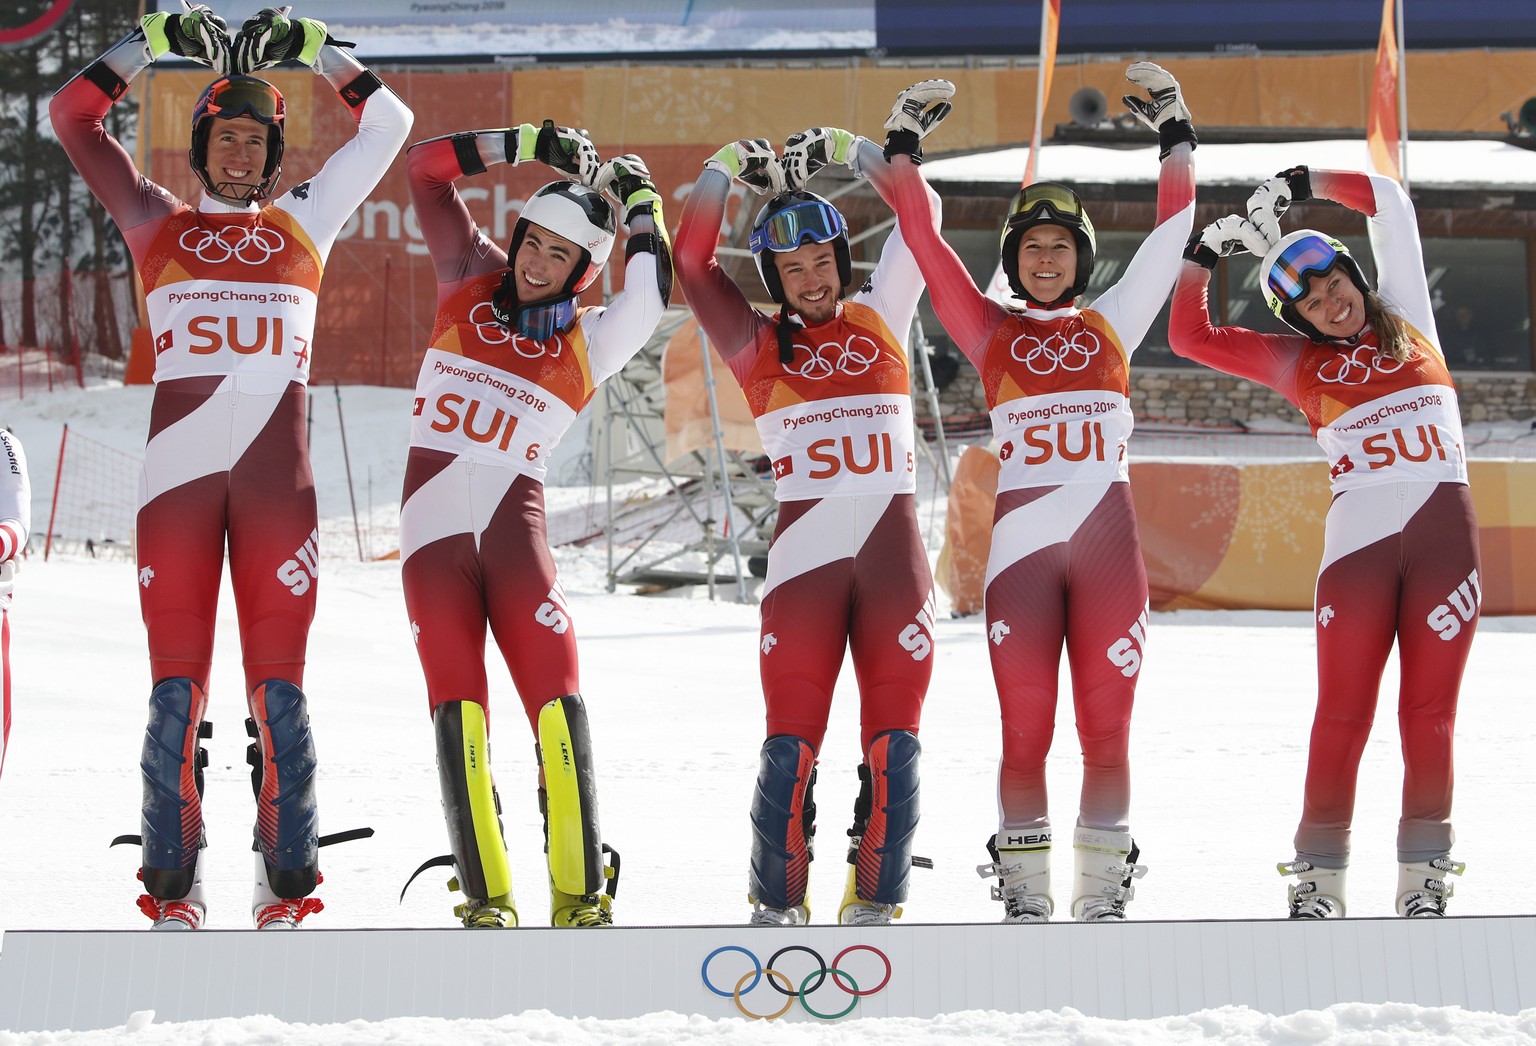 The Switzerland team, from left: Ramon Zenhaeusern, Denise Feierabend, Wendy Holdener, Daniel Yule and Luca Aerni, pose for photos after winning gold in the alpine team event at the 2018 Winter Olympi ...